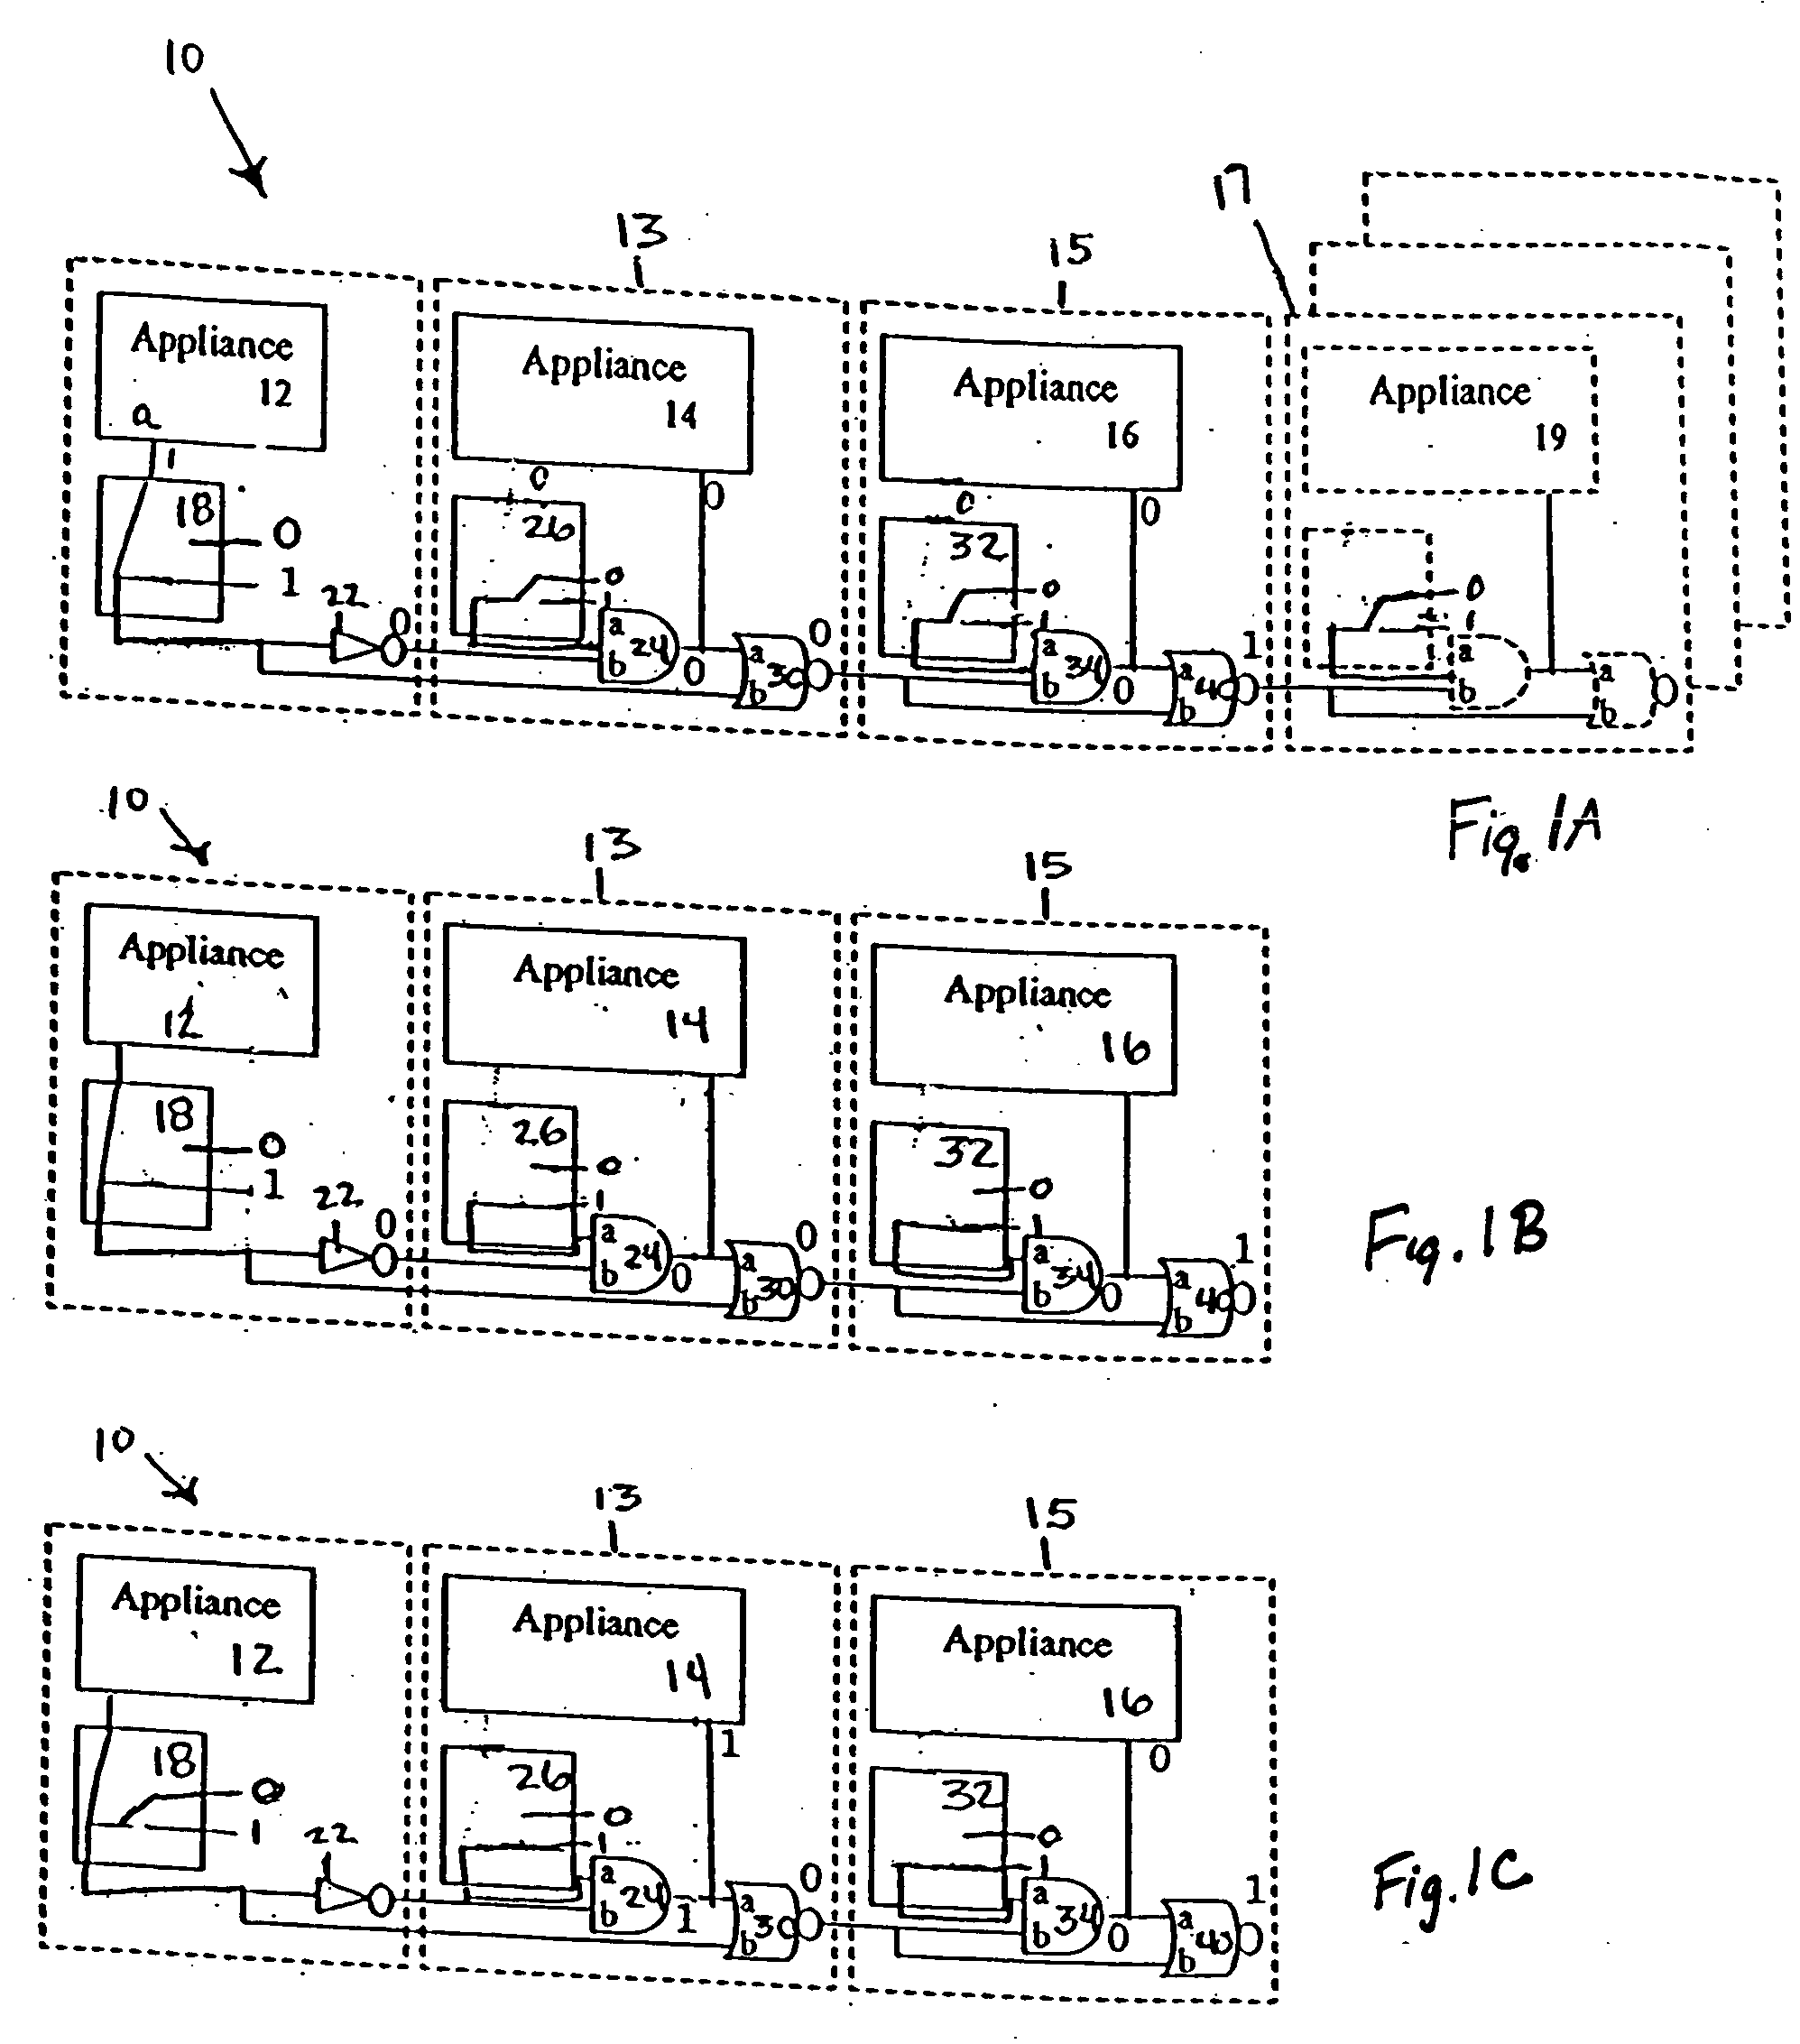 System and method for supply distribution